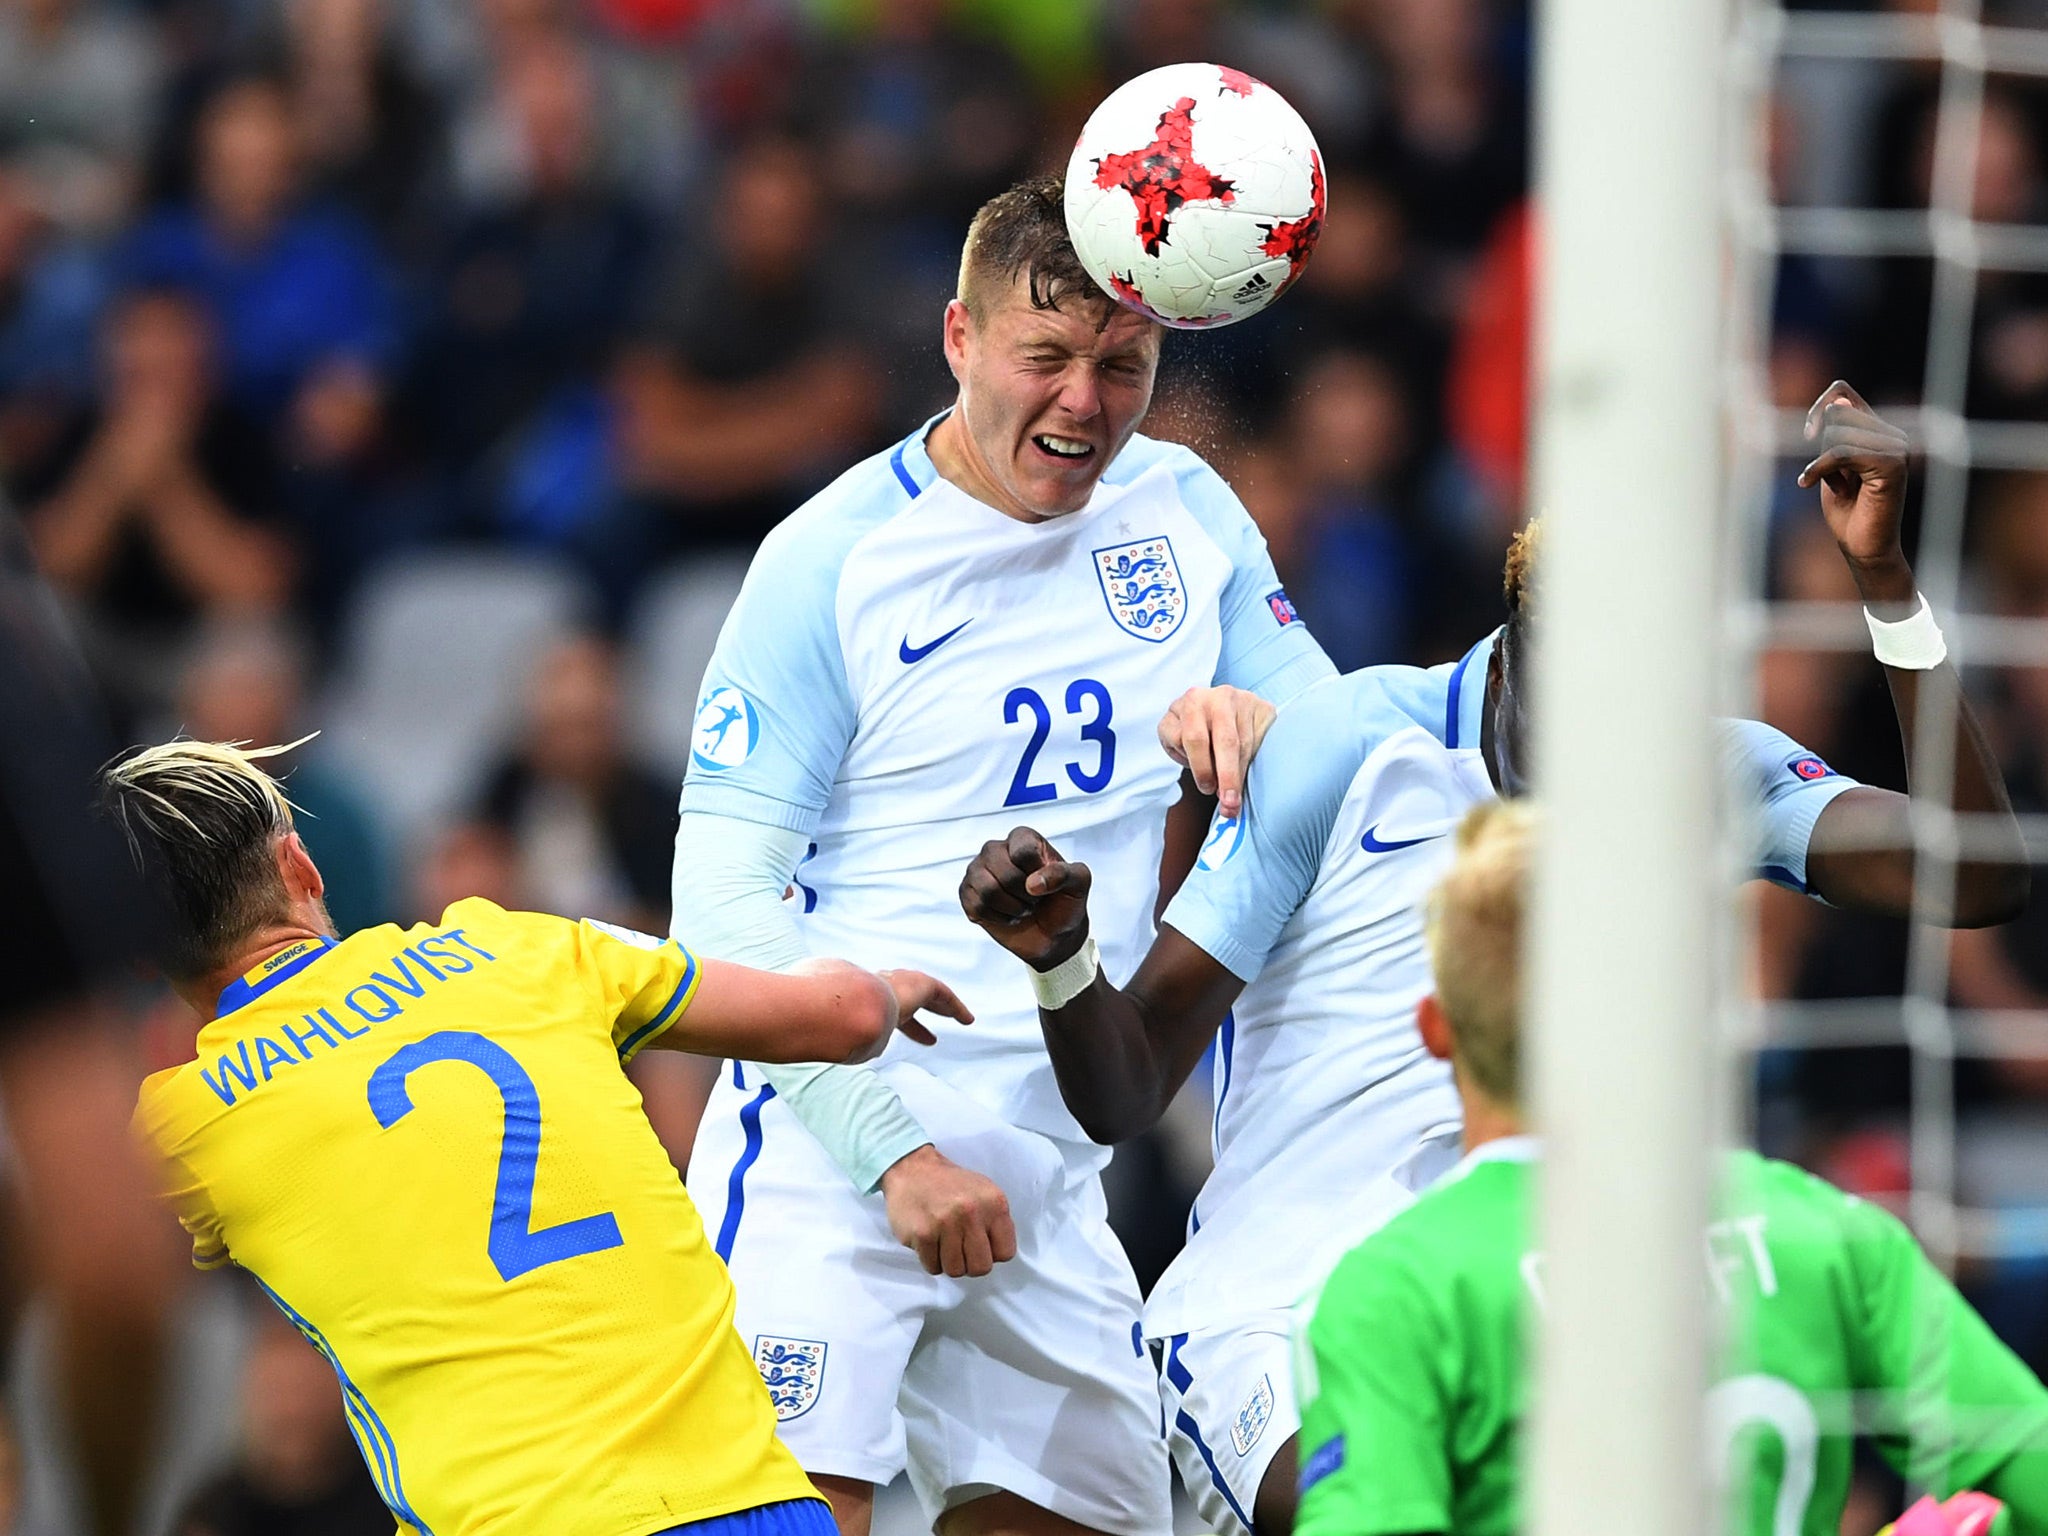 Mawson faces a tremendous test against Germany's frontline